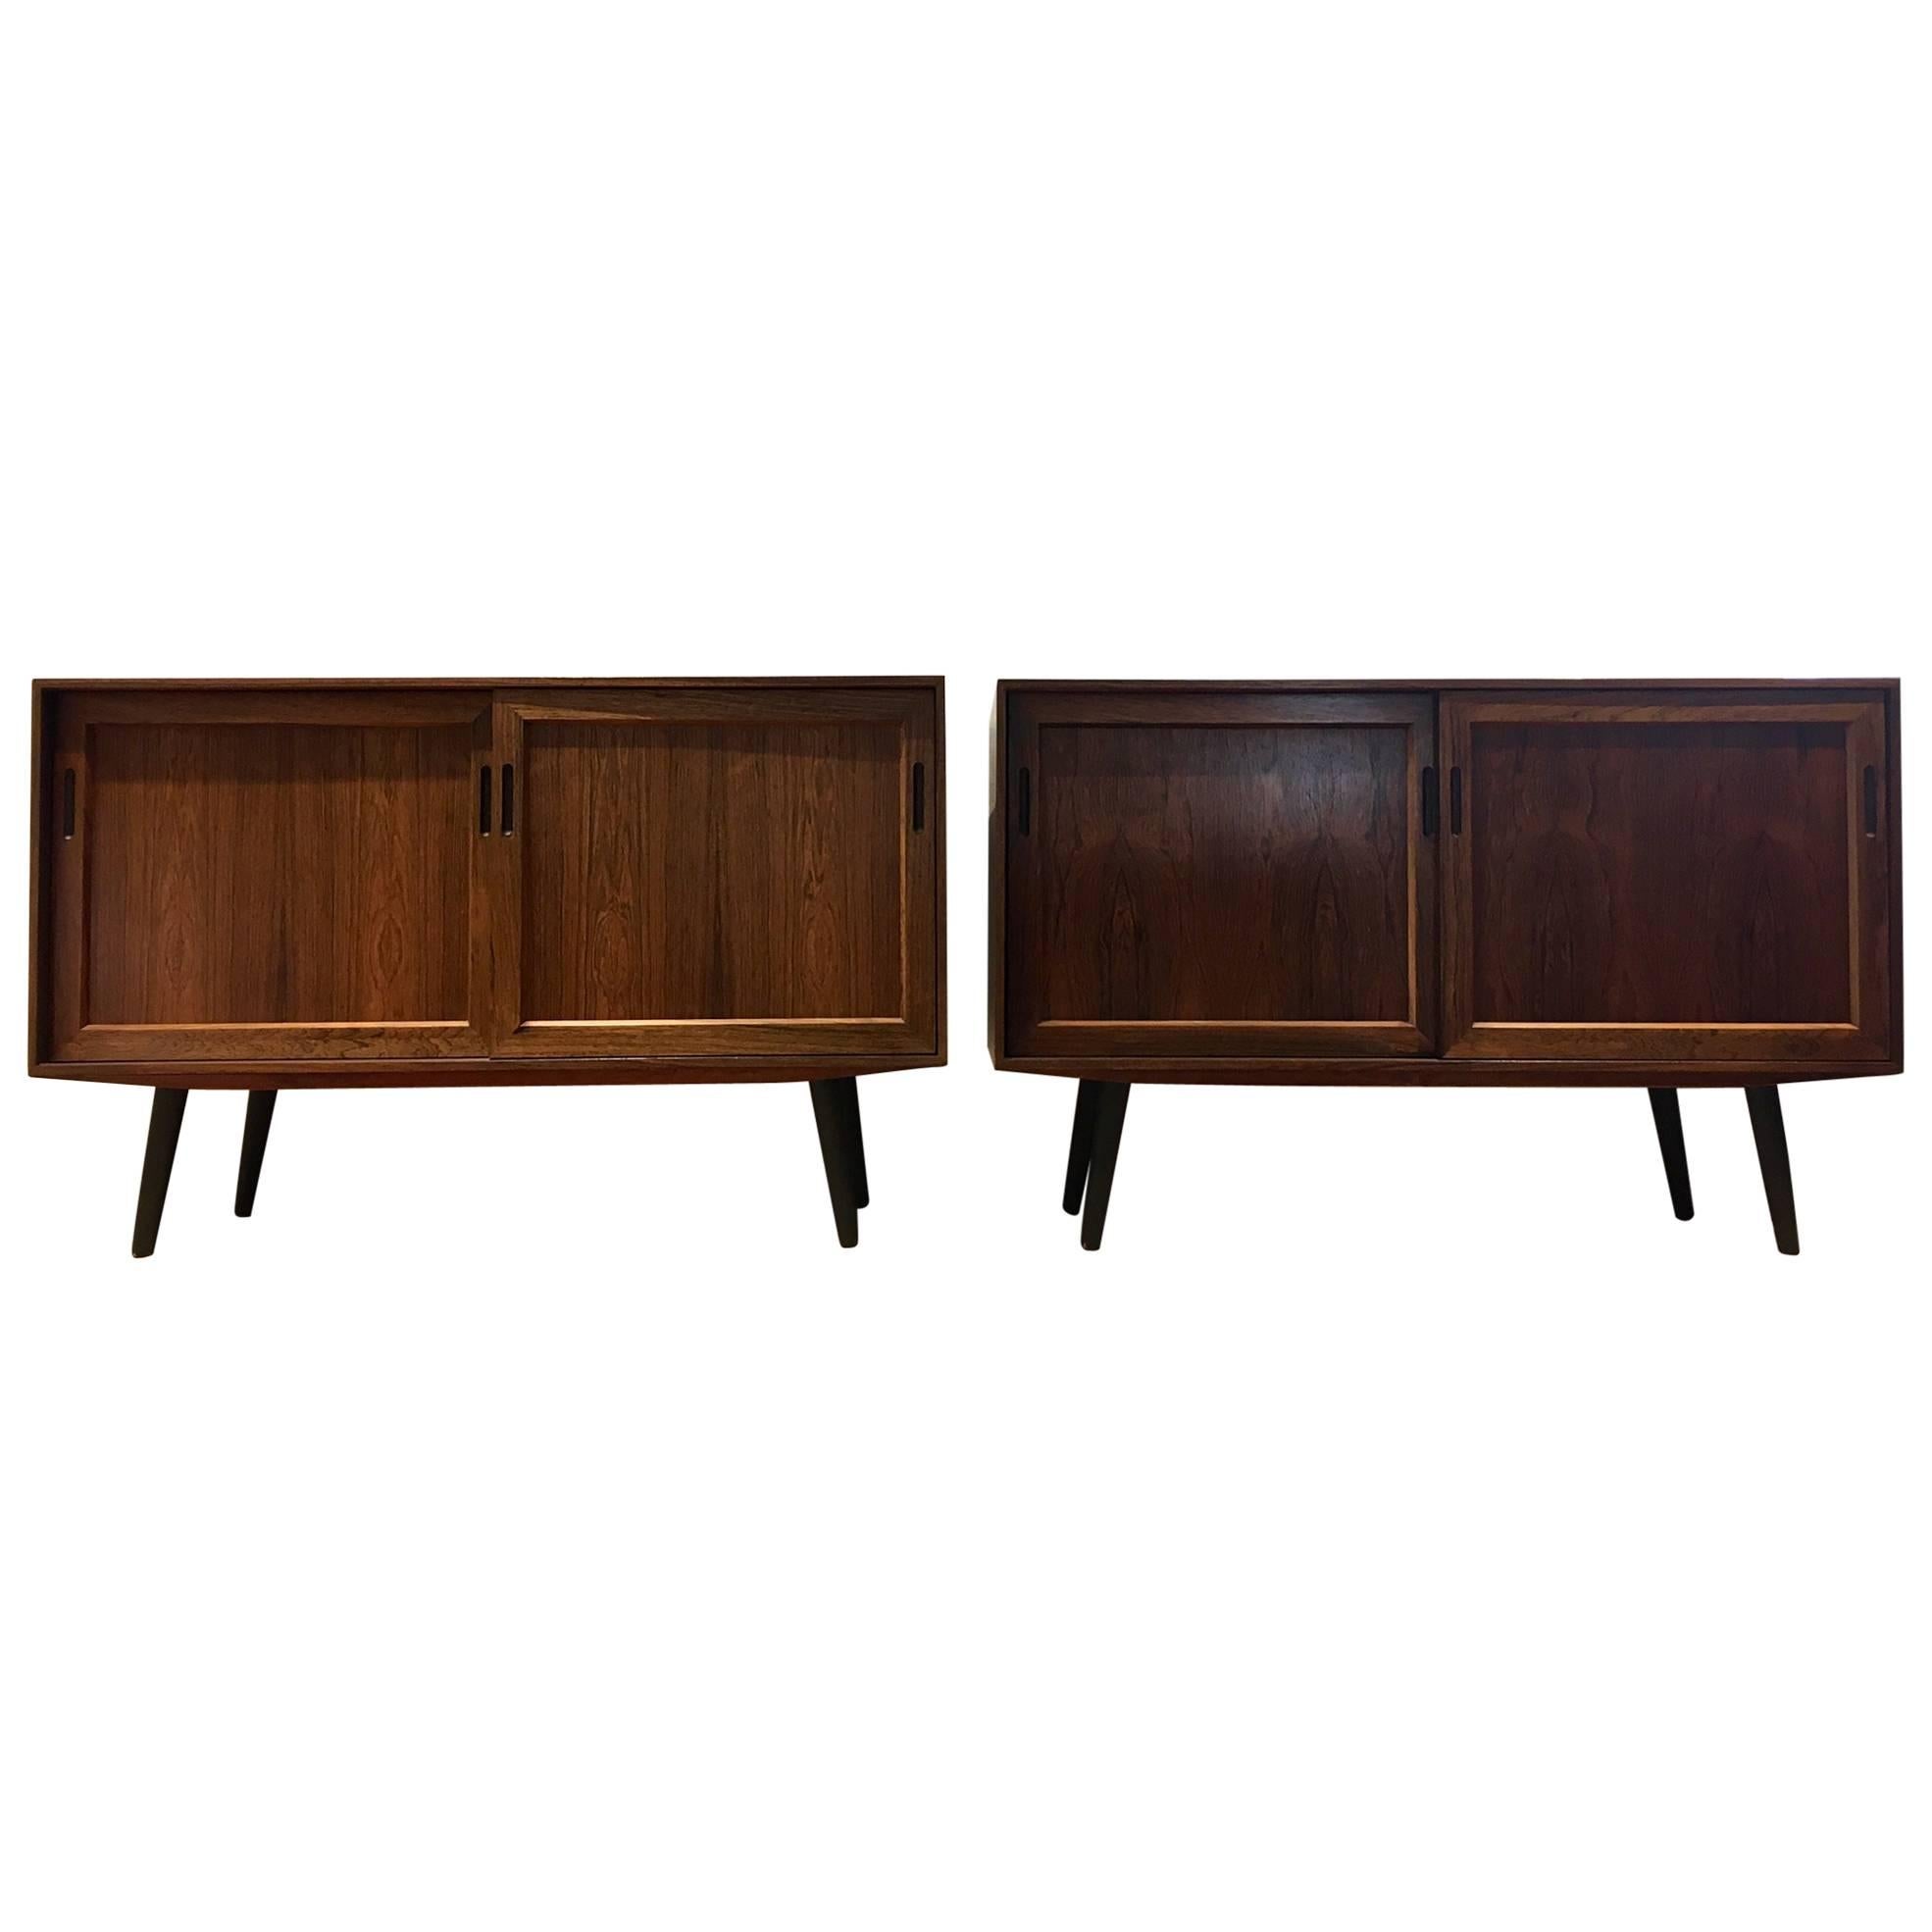 Pair of Mid-20th Century Danish Rosewood Sideboards